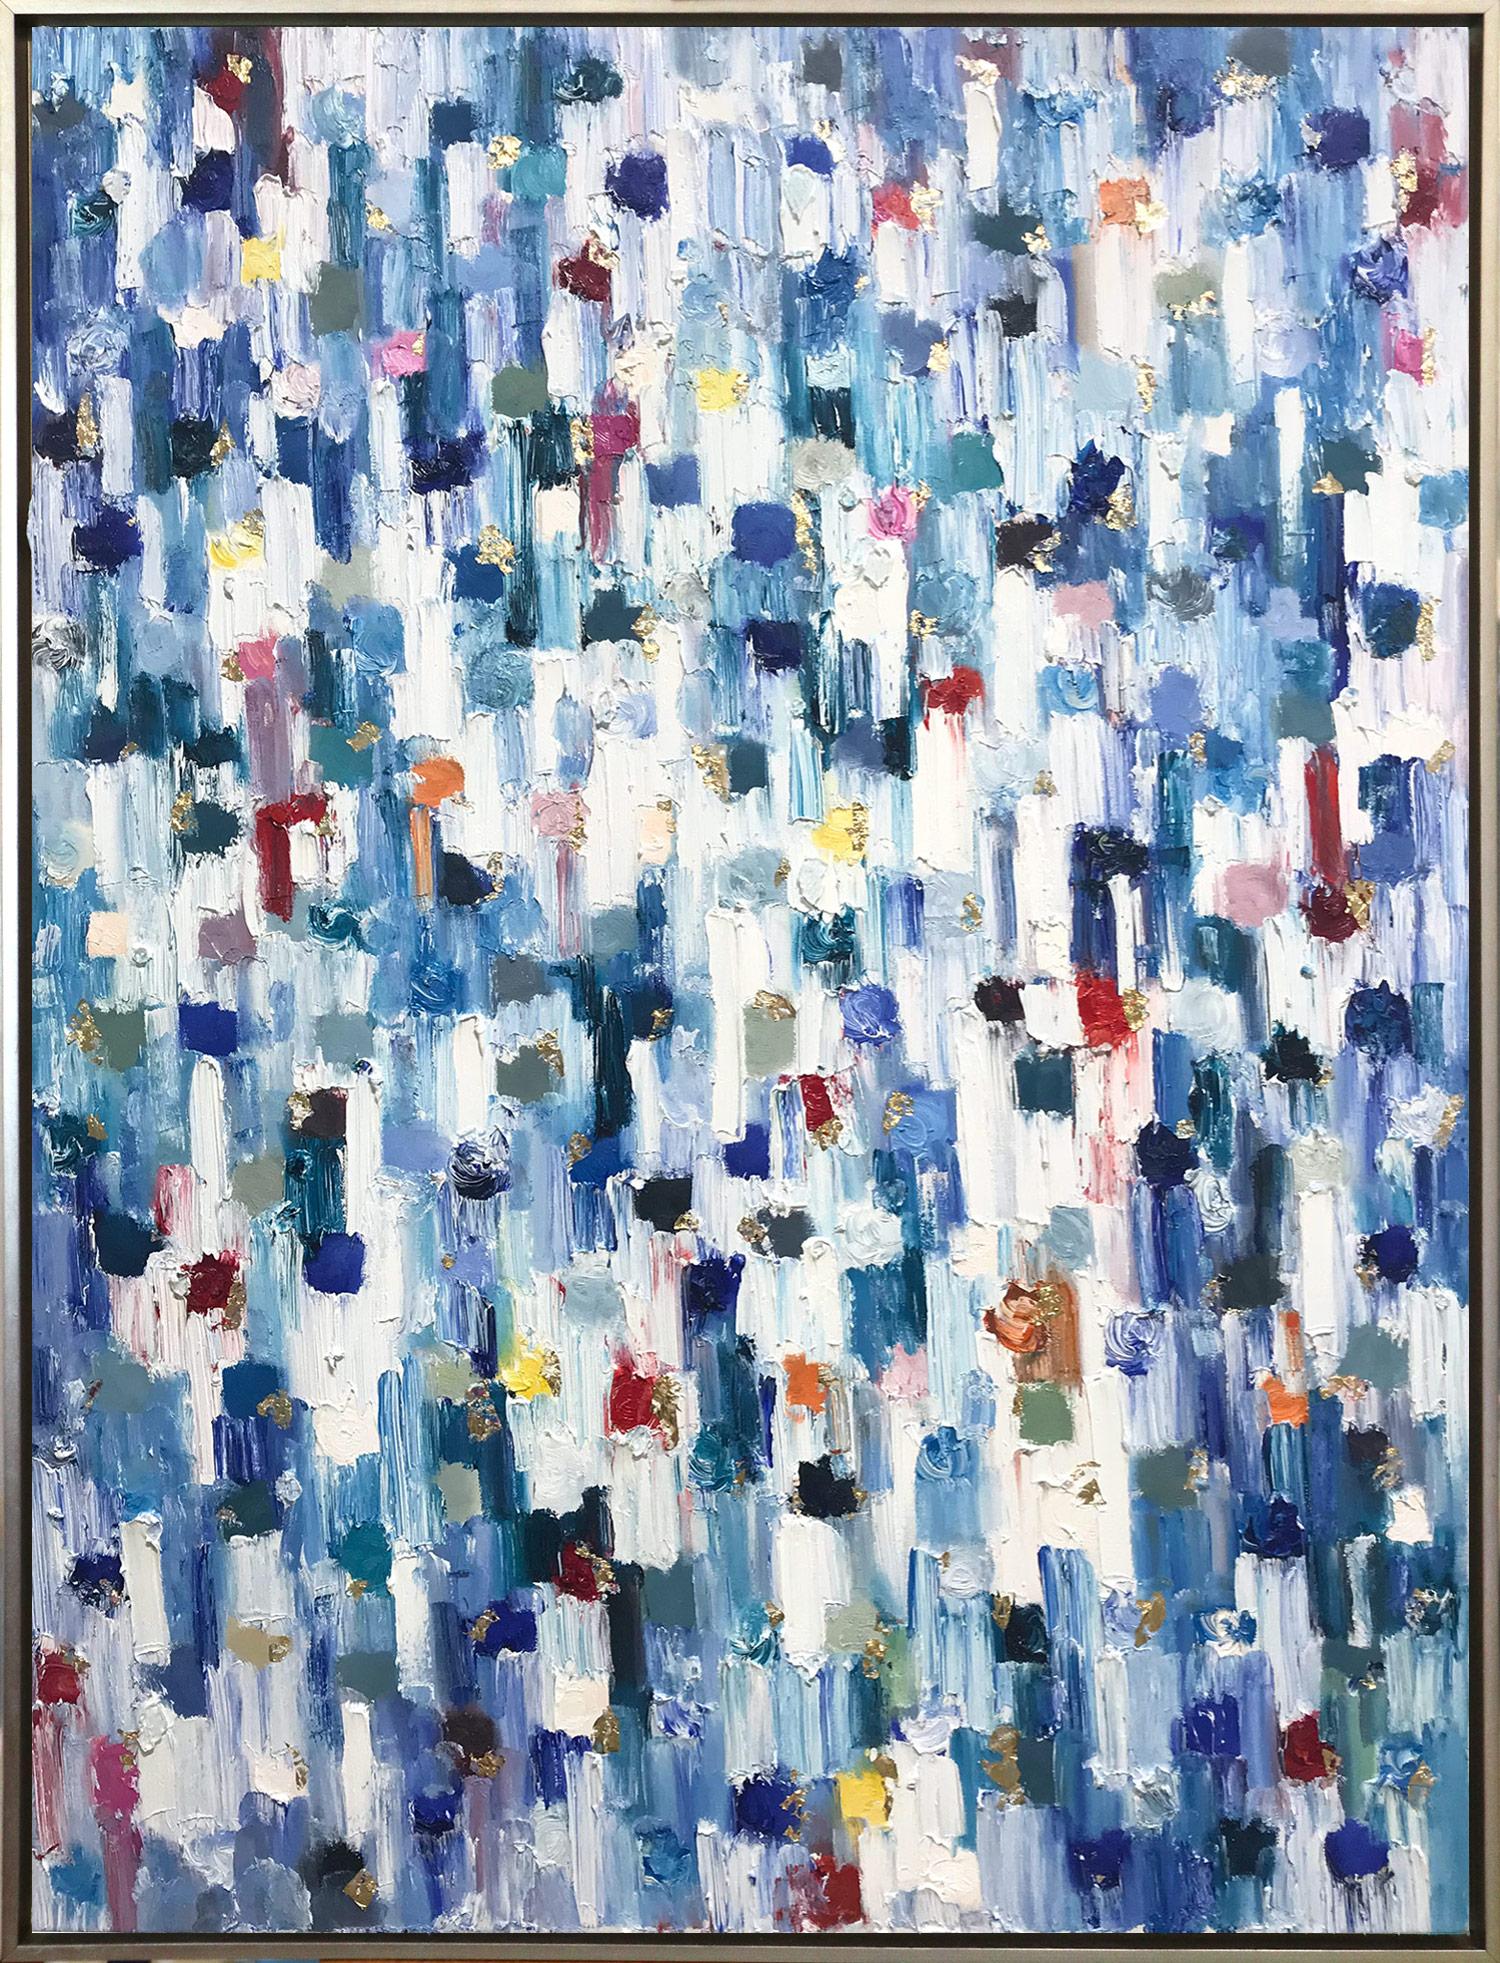 Cindy Shaoul Abstract Painting - "Dripping Dots - Saint-Tropez" Colorful Abstract Oil Painting on Canvas